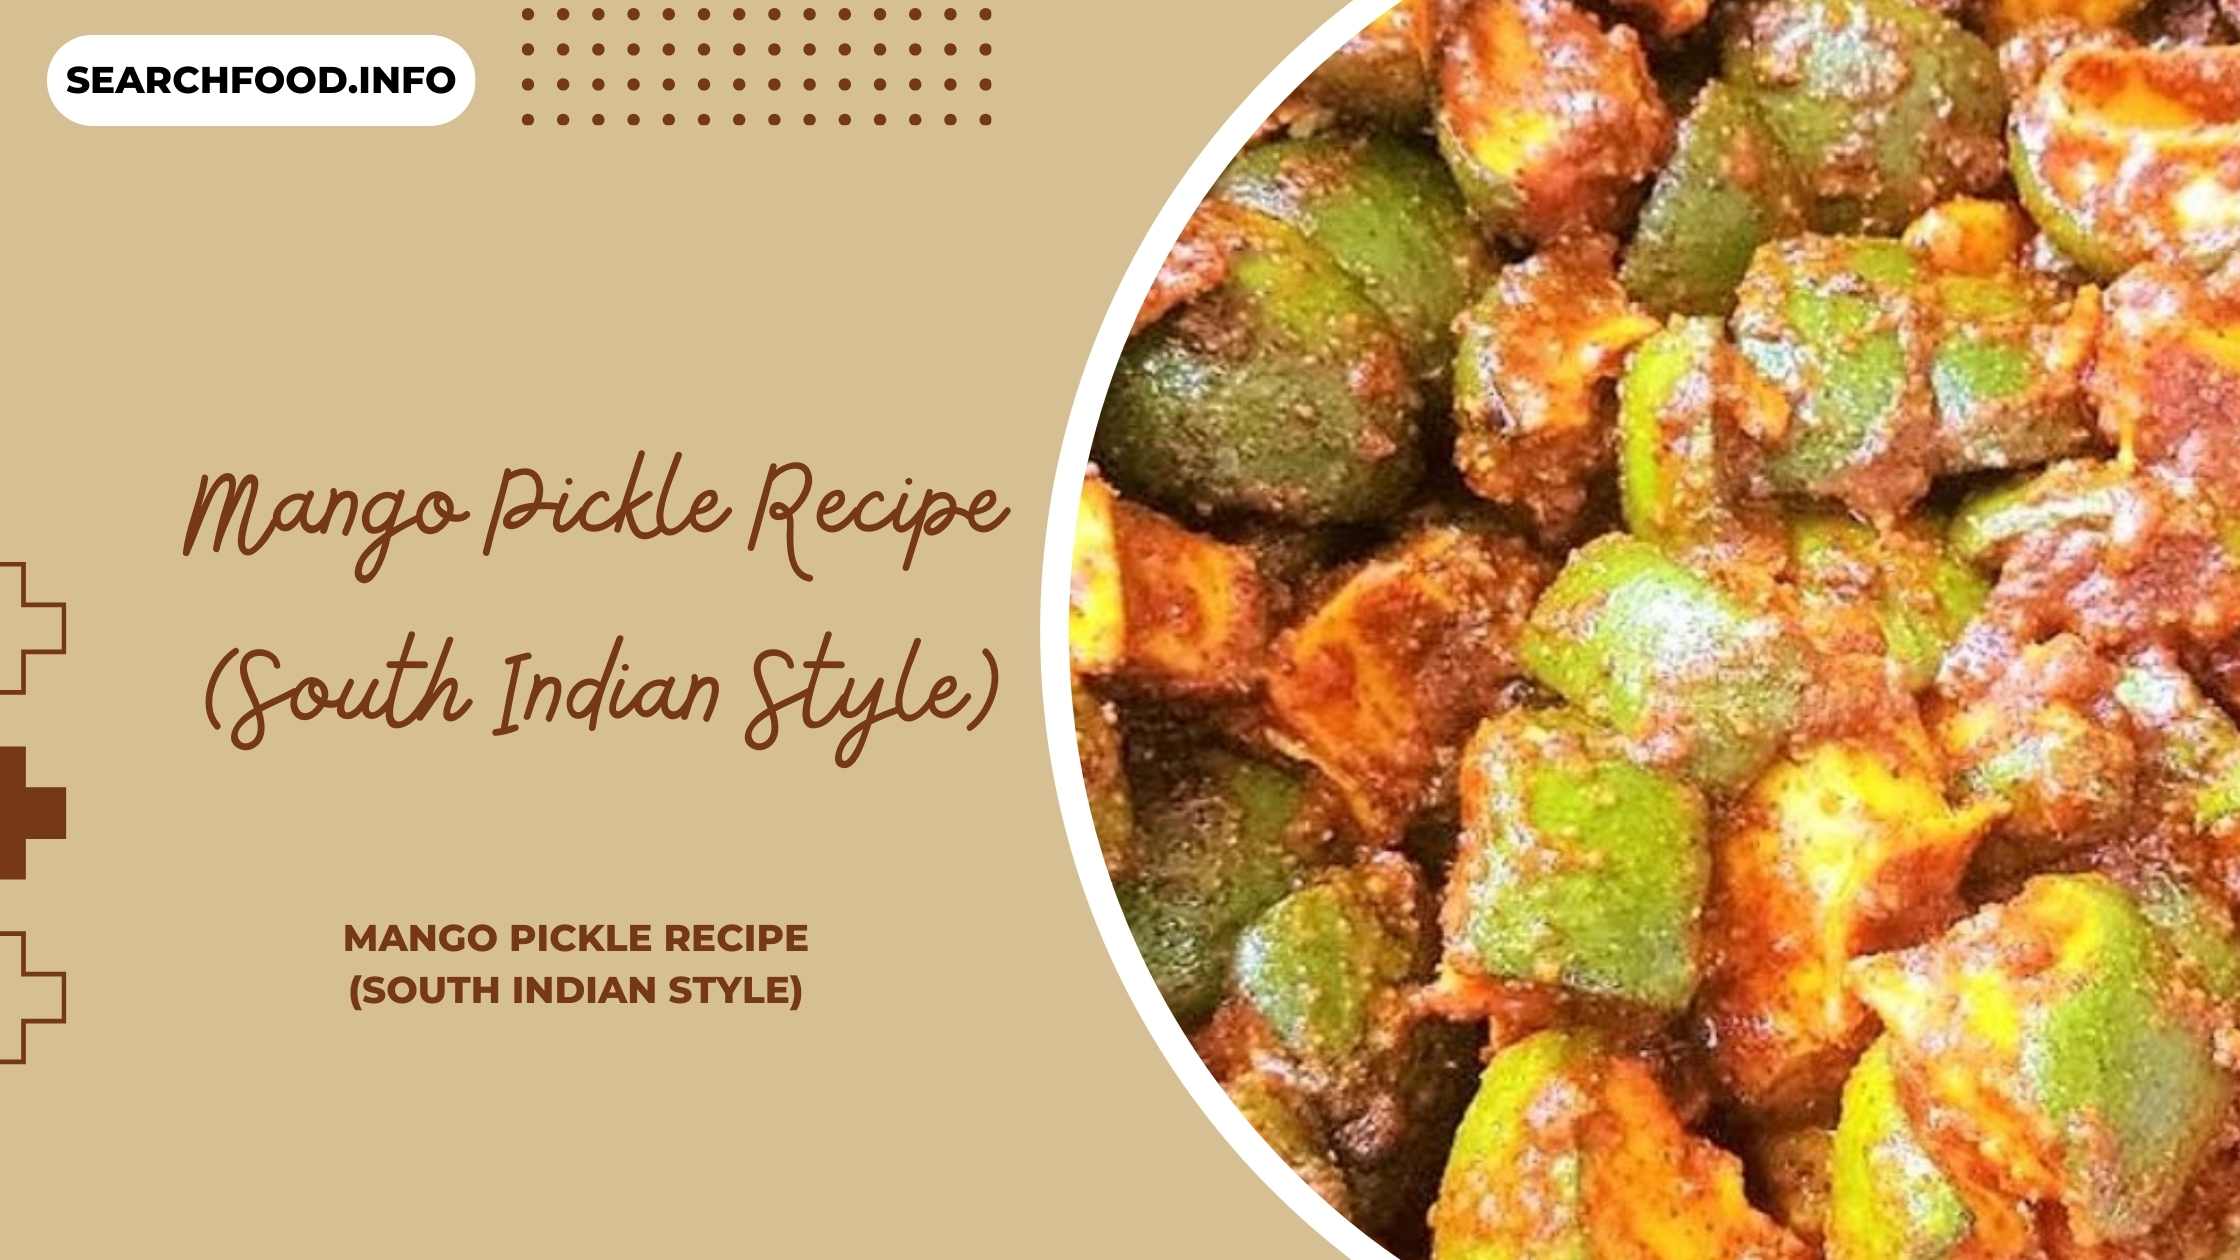 Mango Pickle Recipe (South Indian Style)